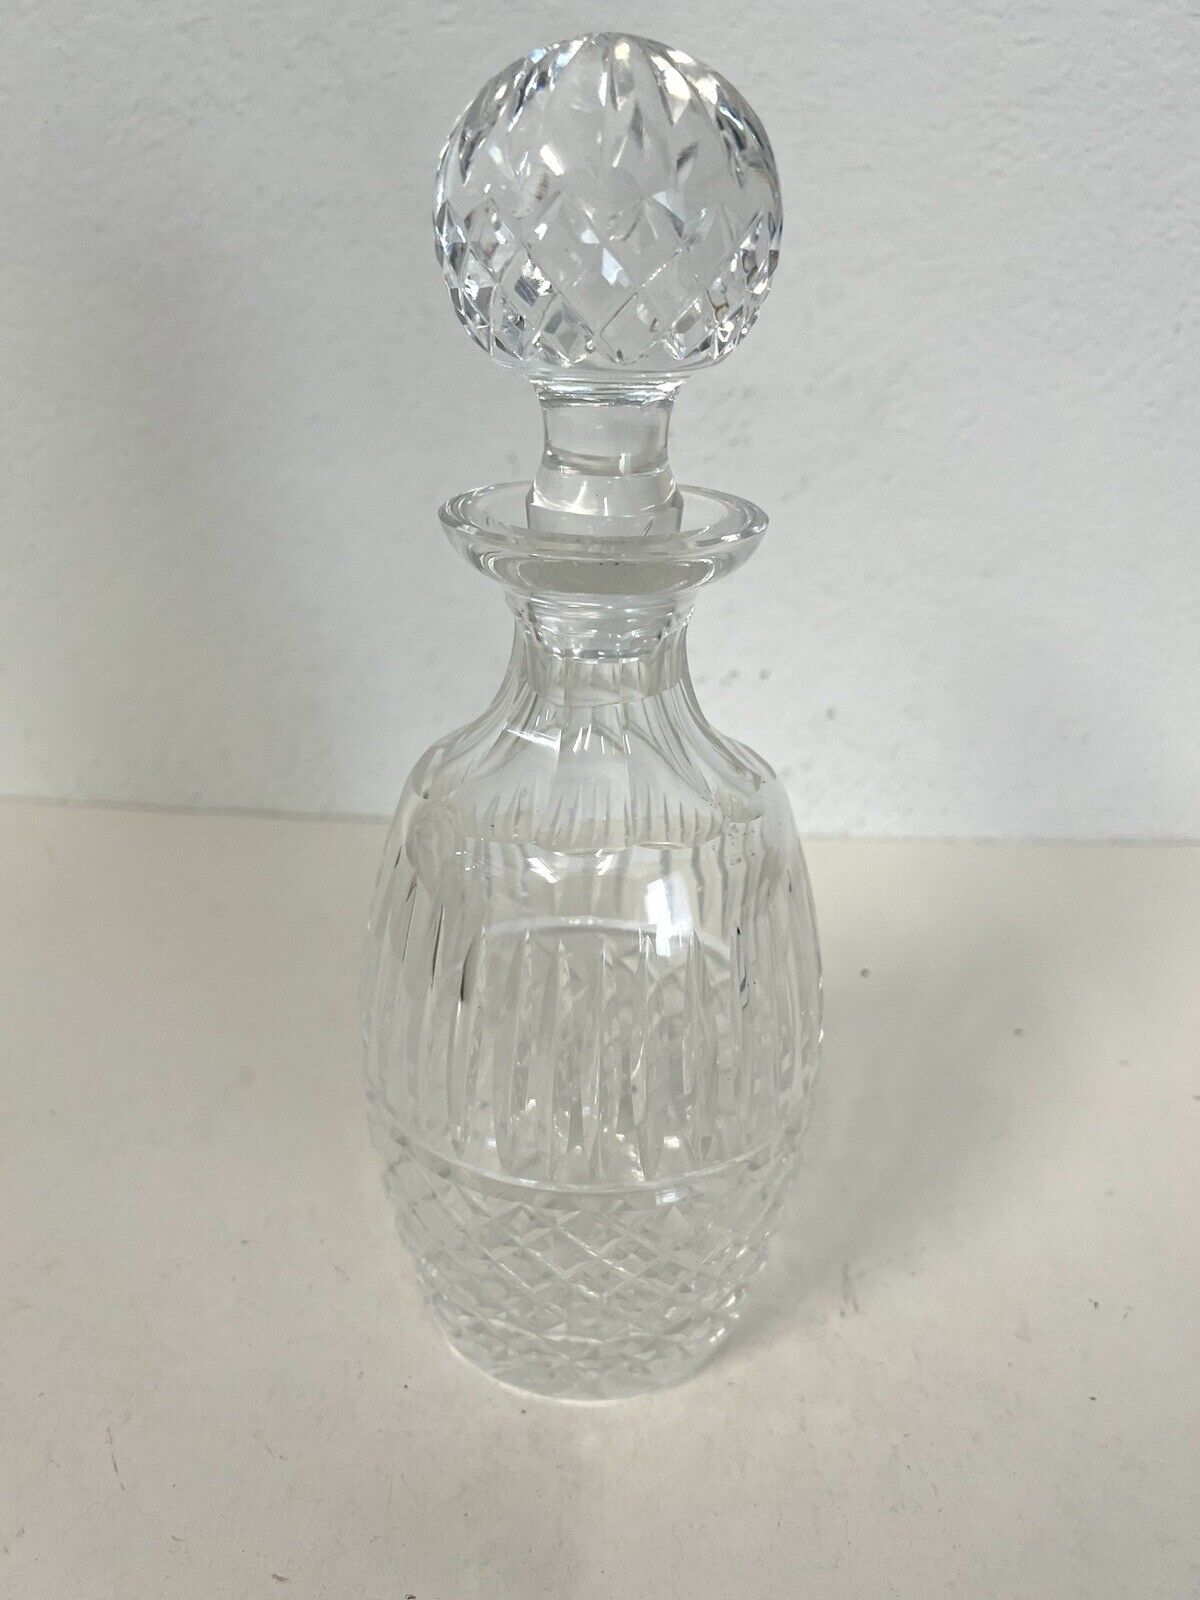 AUTHENTIC Waterford Crystal Kylemore Decanter Diamond Hand Cut Vintage-Excellent